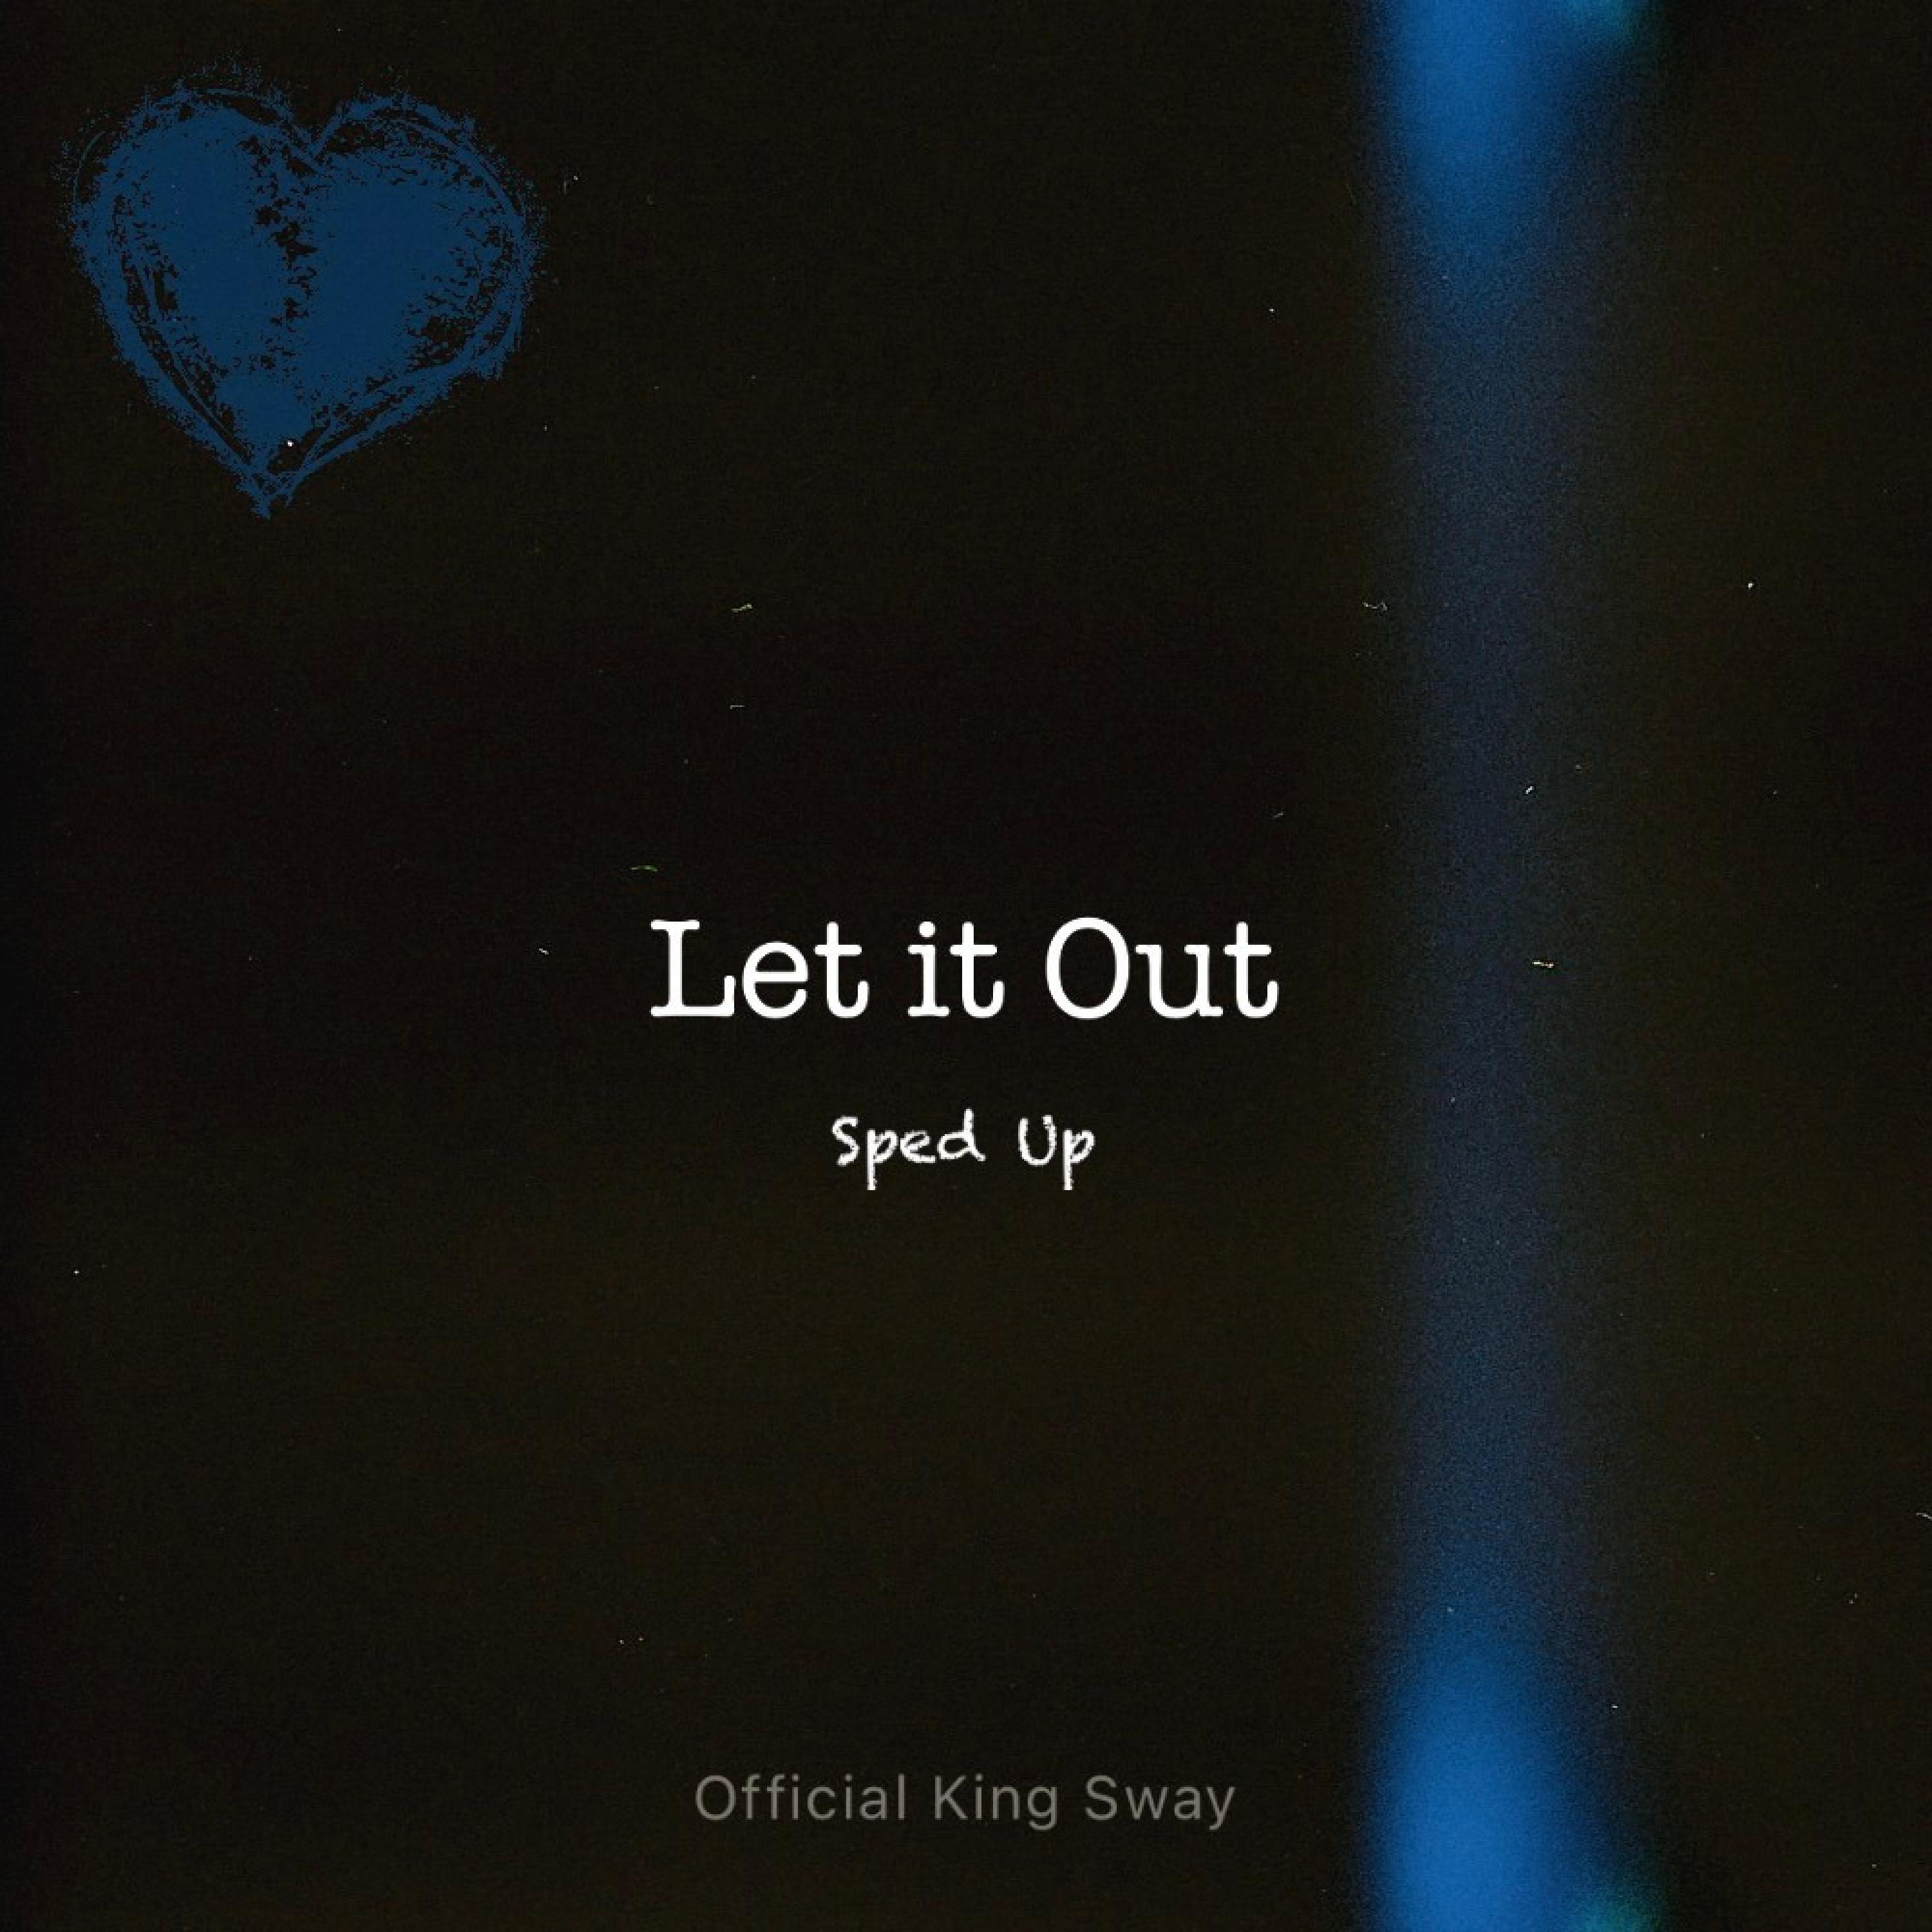 Official King Sway - Let it out (Sped Up)